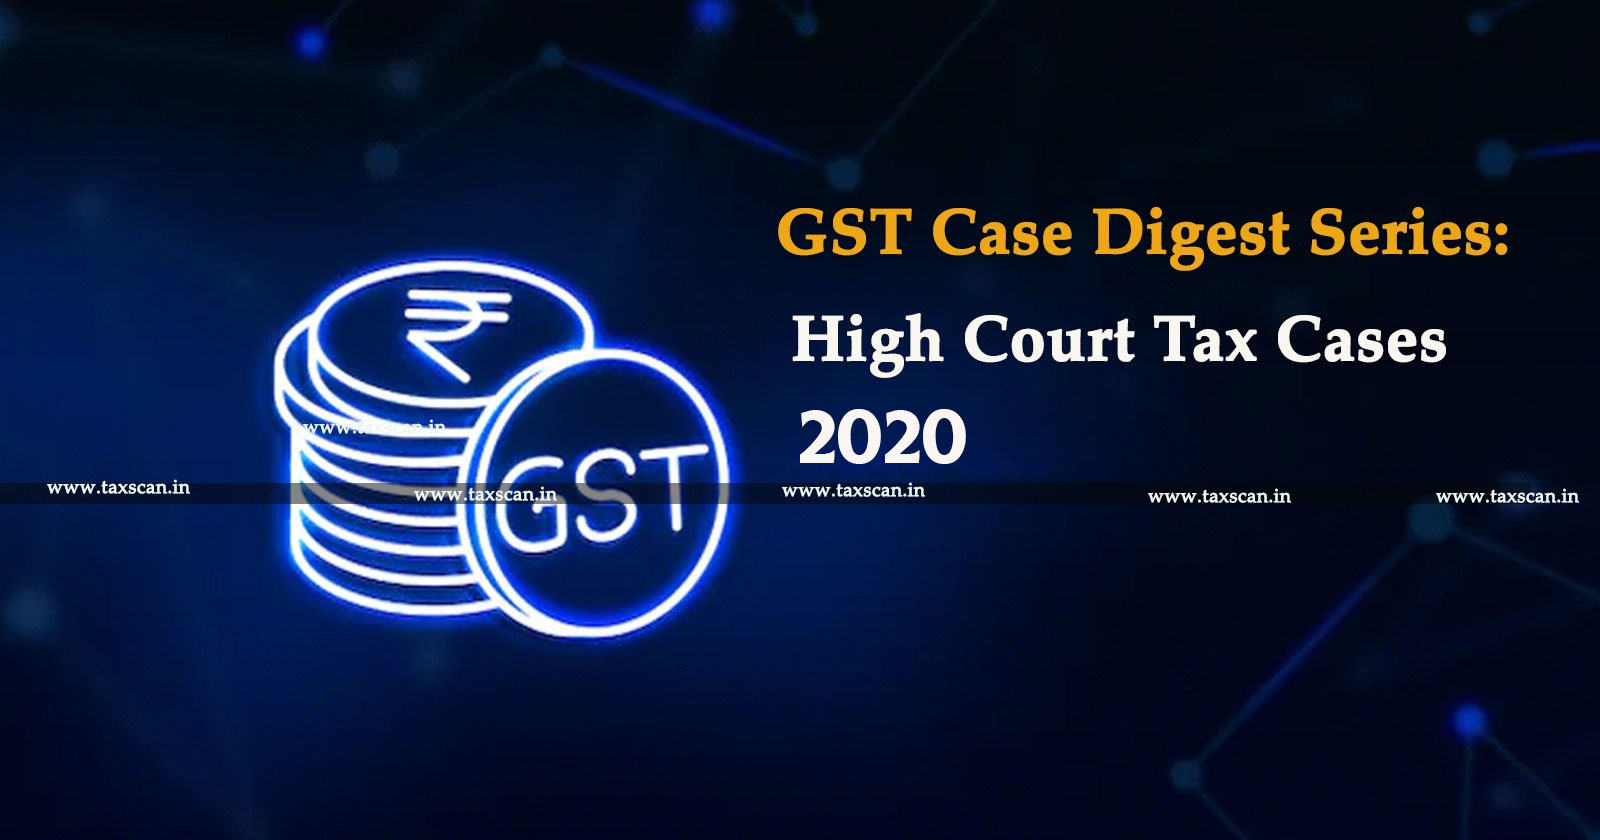 GST - GST Case Digest Series - Goods and Services Tax -excise duty VAT - TAXSCAN